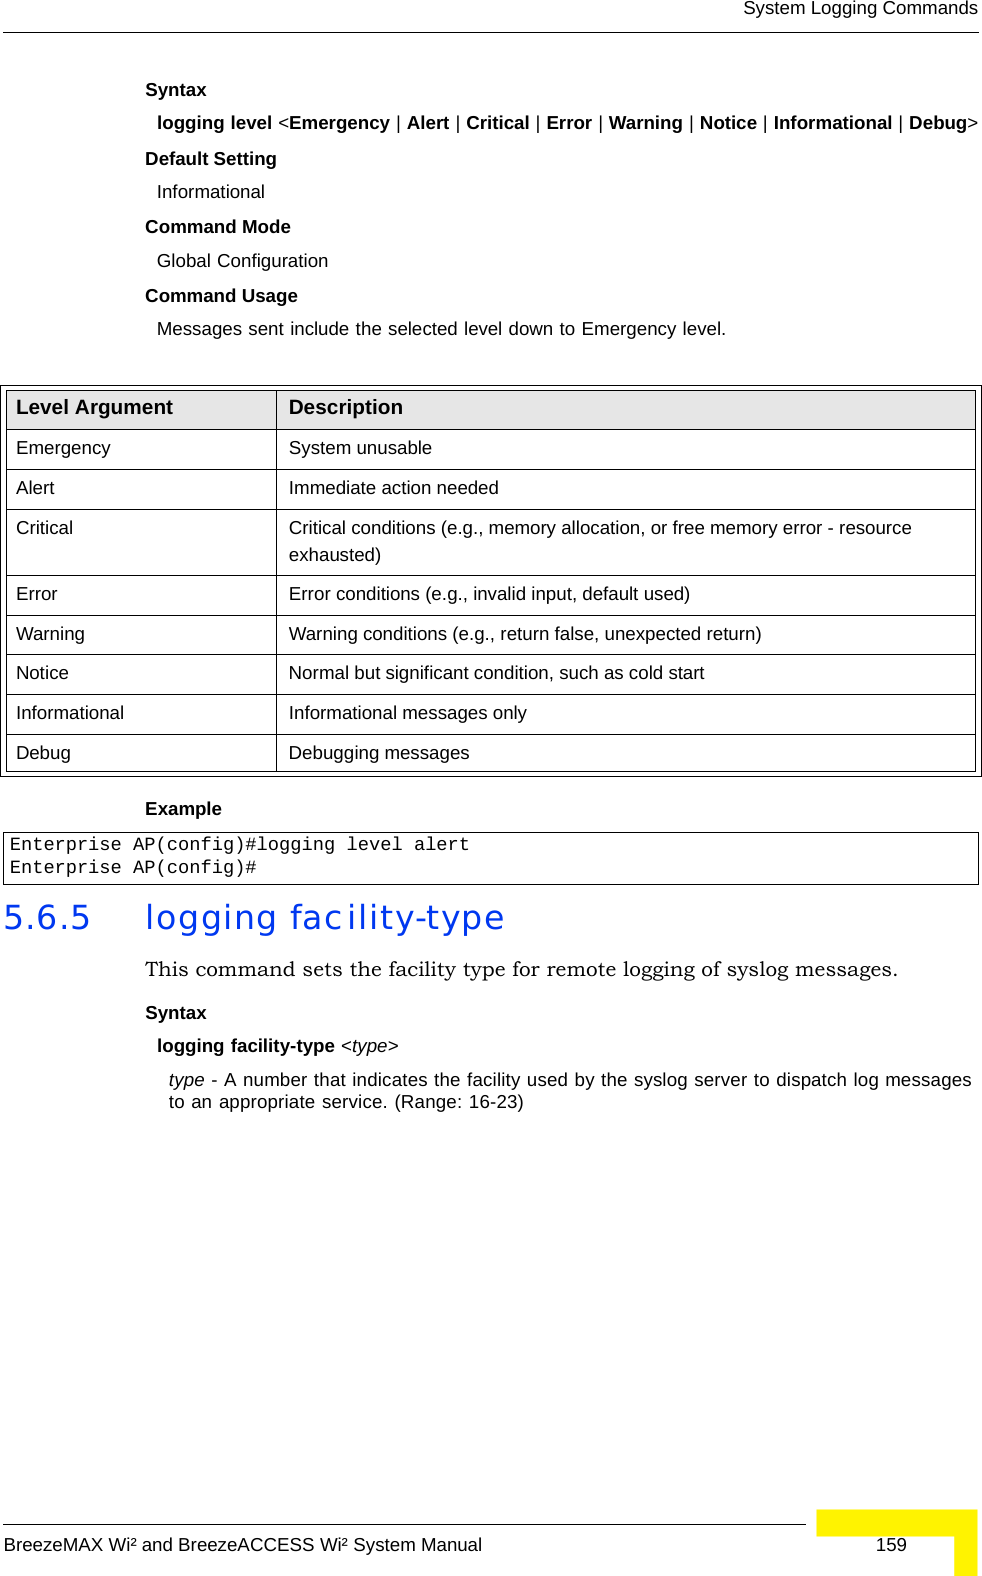 System Logging CommandsBreezeMAX Wi² and BreezeACCESS Wi² System Manual  159Syntaxlogging level &lt;Emergency | Alert | Critical | Error | Warning | Notice | Informational | Debug&gt;Default Setting InformationalCommand Mode Global ConfigurationCommand Usage Messages sent include the selected level down to Emergency level.Example 5.6.5 logging facility-typeThis command sets the facility type for remote logging of syslog messages.Syntaxlogging facility-type &lt;type&gt;type - A number that indicates the facility used by the syslog server to dispatch log messages to an appropriate service. (Range: 16-23)Level Argument DescriptionEmergency System unusableAlert Immediate action neededCritical Critical conditions (e.g., memory allocation, or free memory error - resource exhausted)Error Error conditions (e.g., invalid input, default used)Warning Warning conditions (e.g., return false, unexpected return)Notice Normal but significant condition, such as cold start Informational Informational messages onlyDebug Debugging messagesEnterprise AP(config)#logging level alertEnterprise AP(config)#